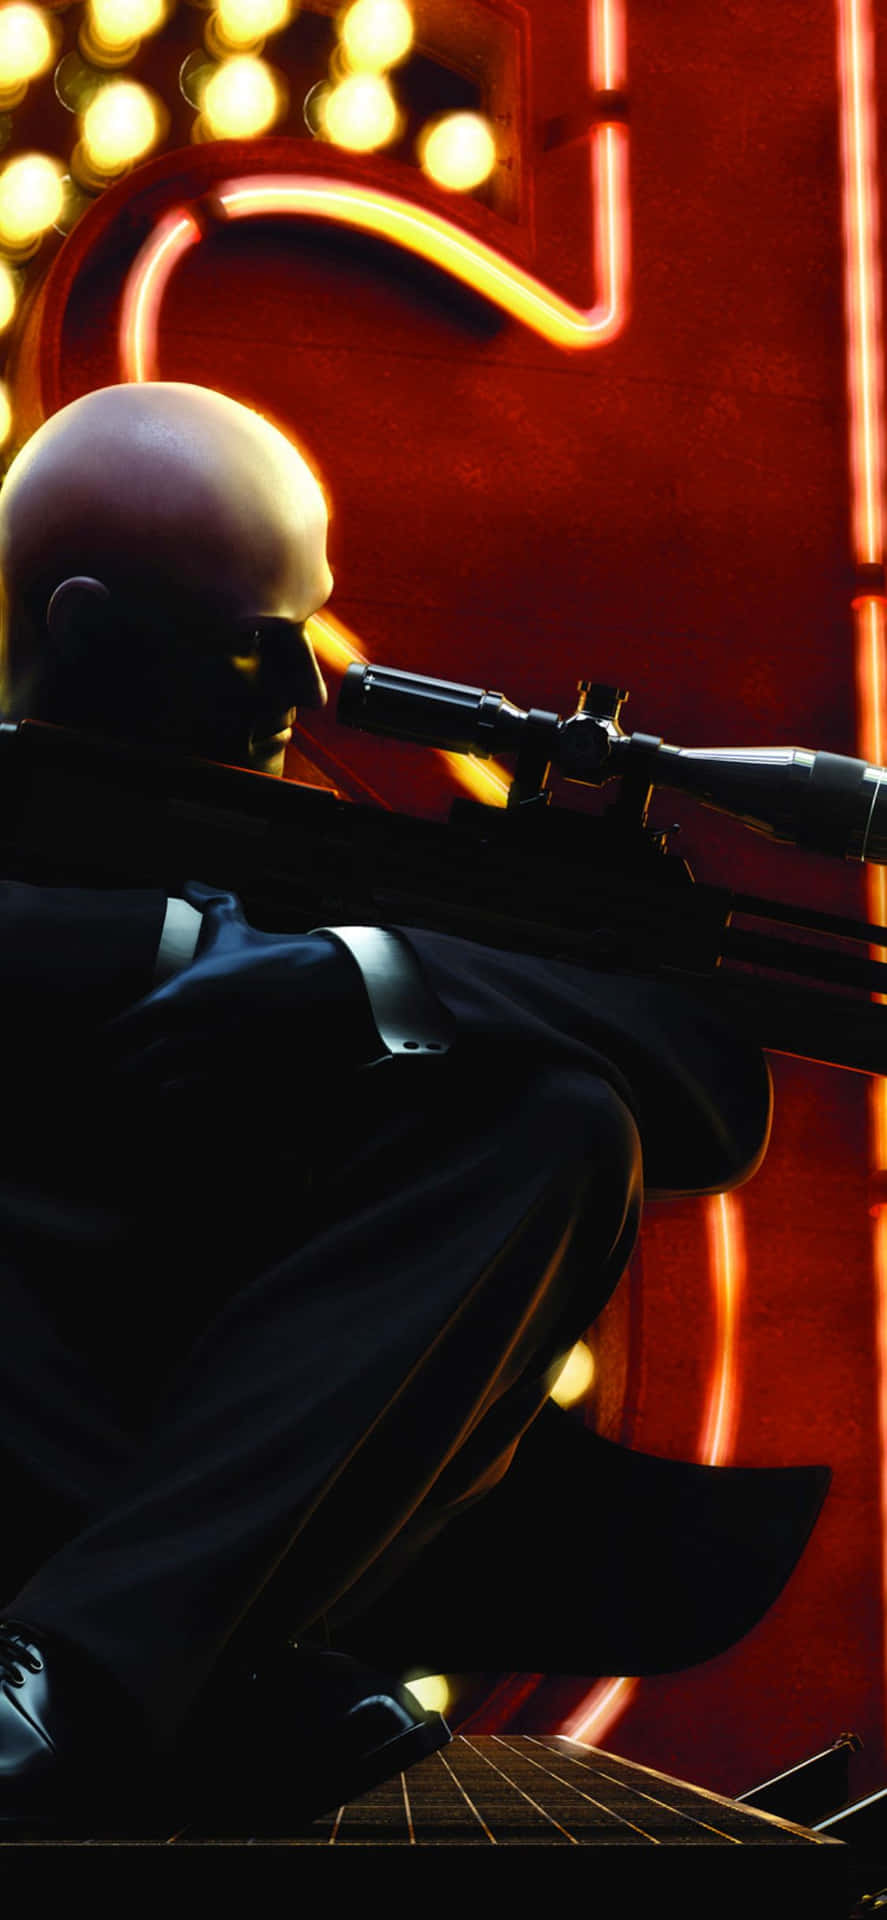 "Take on contracts in style with the iPhone X and Hitman Absolution."